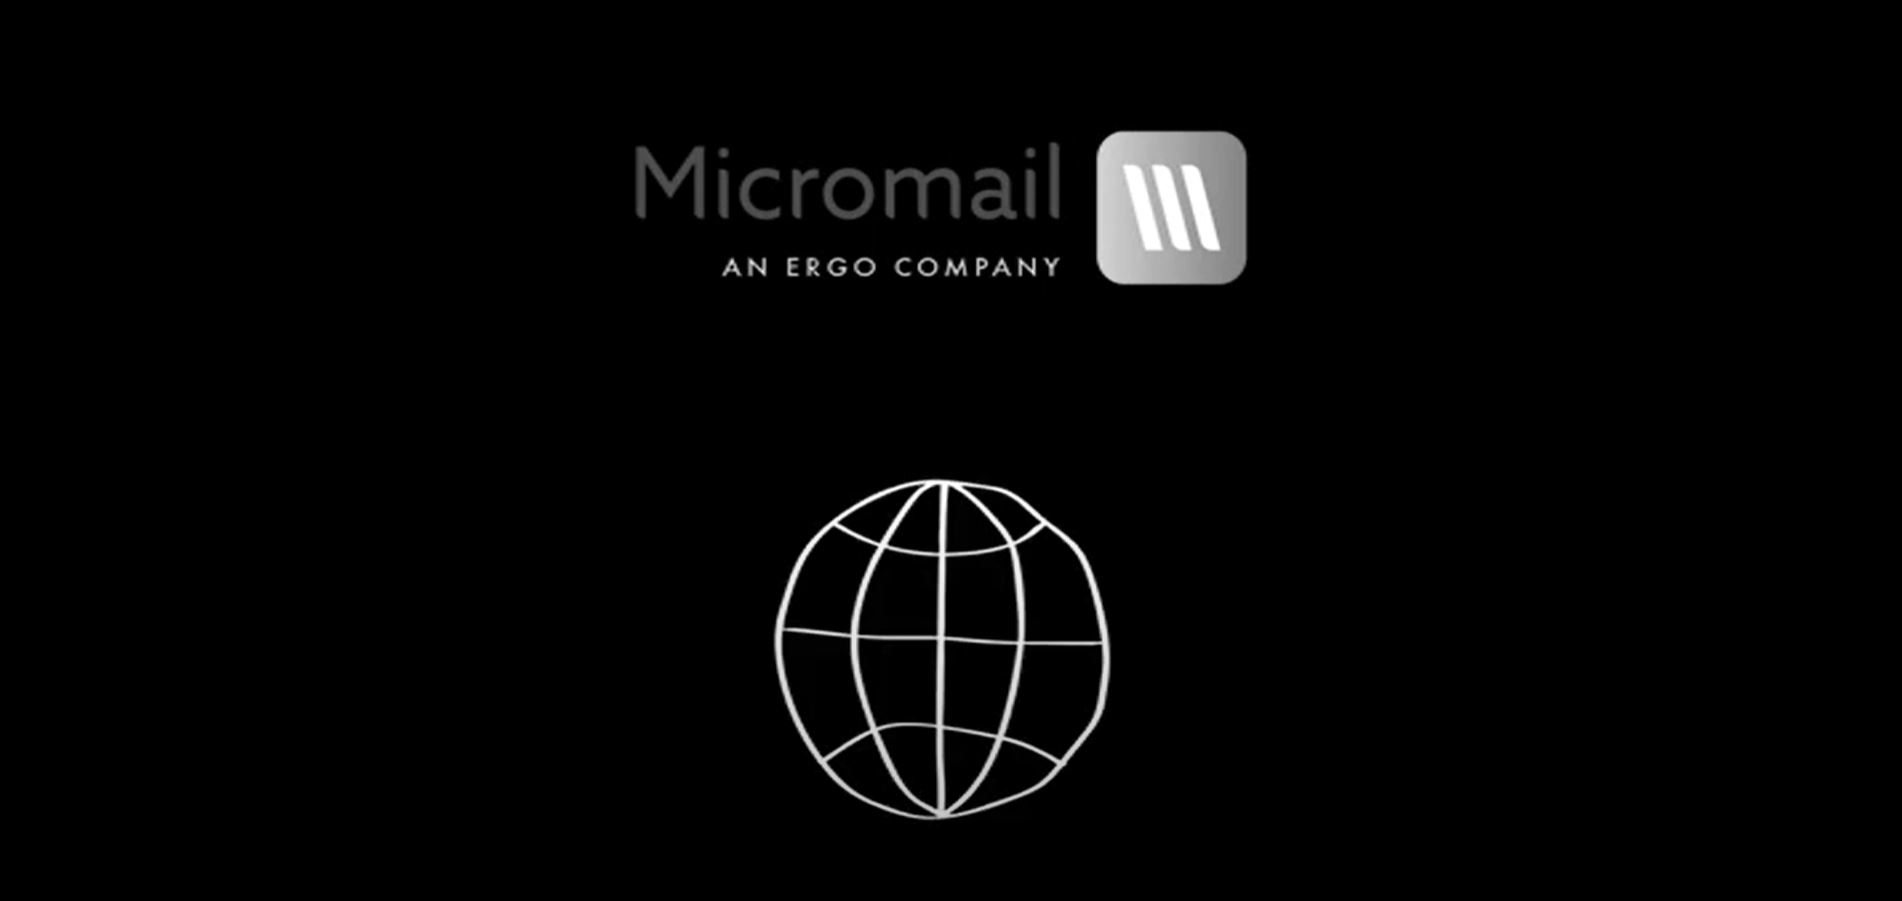 We are Micromail